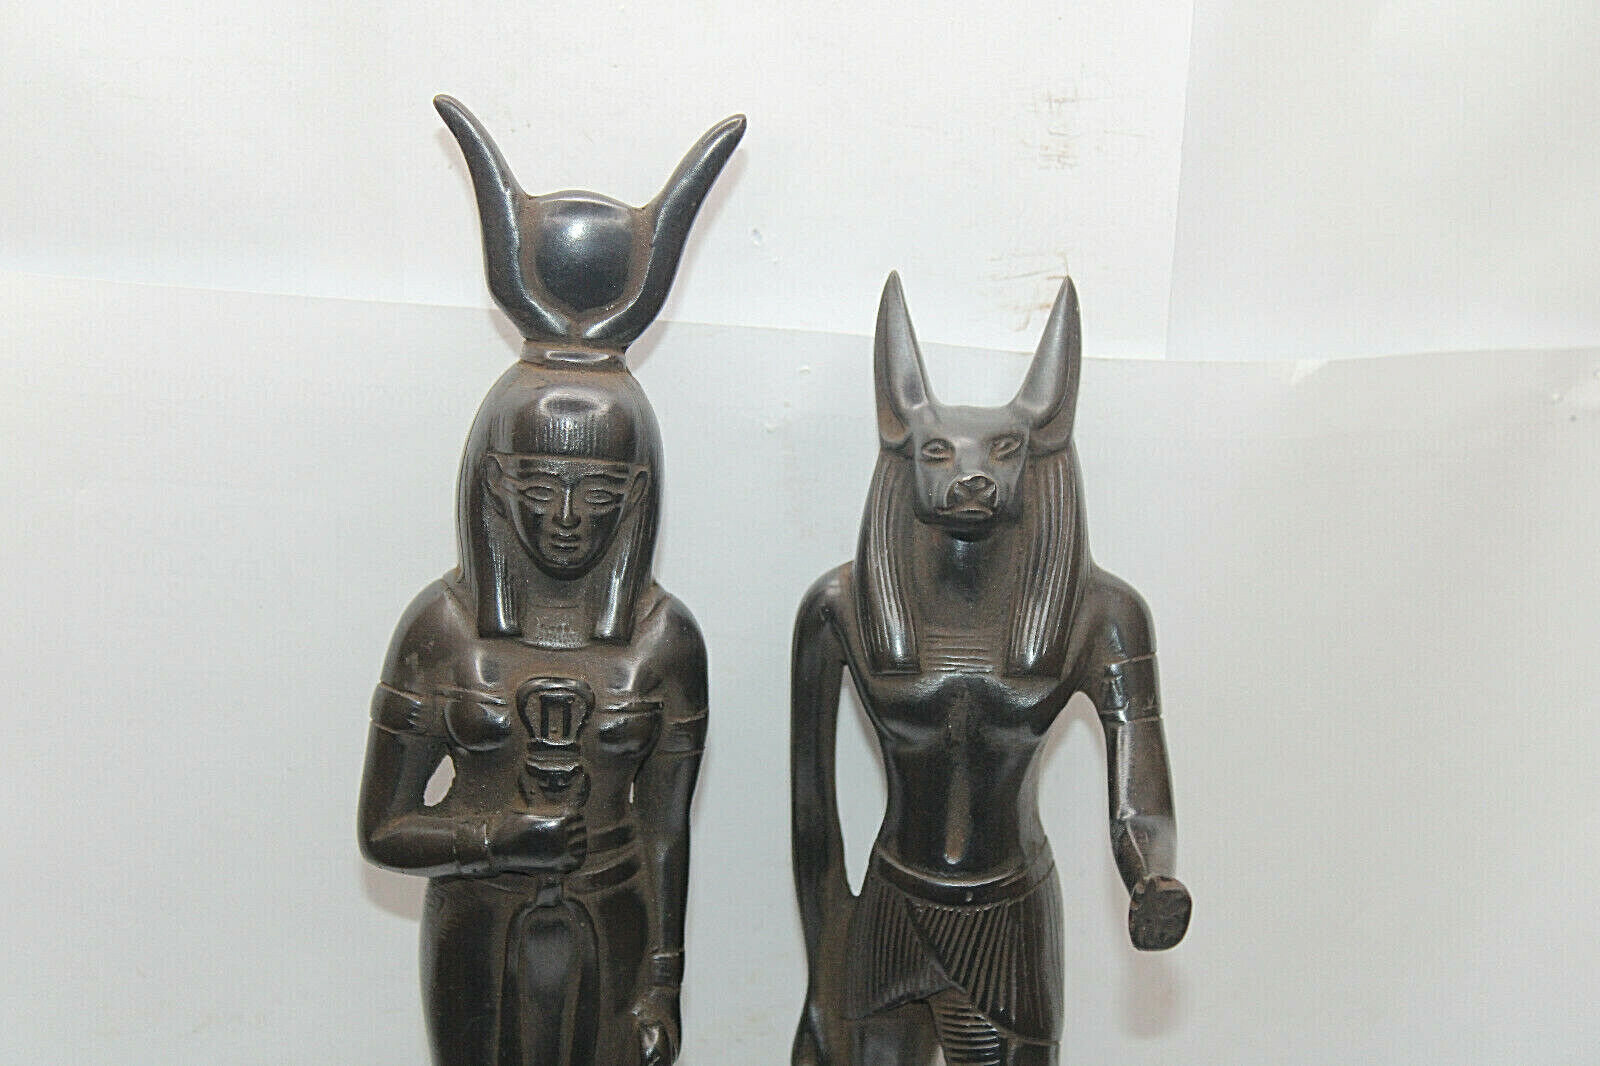 2 RARE ANCIENT EGYPTIAN ANTIQUE ANUBIS Protect Isis Statues 1789-1537 BC